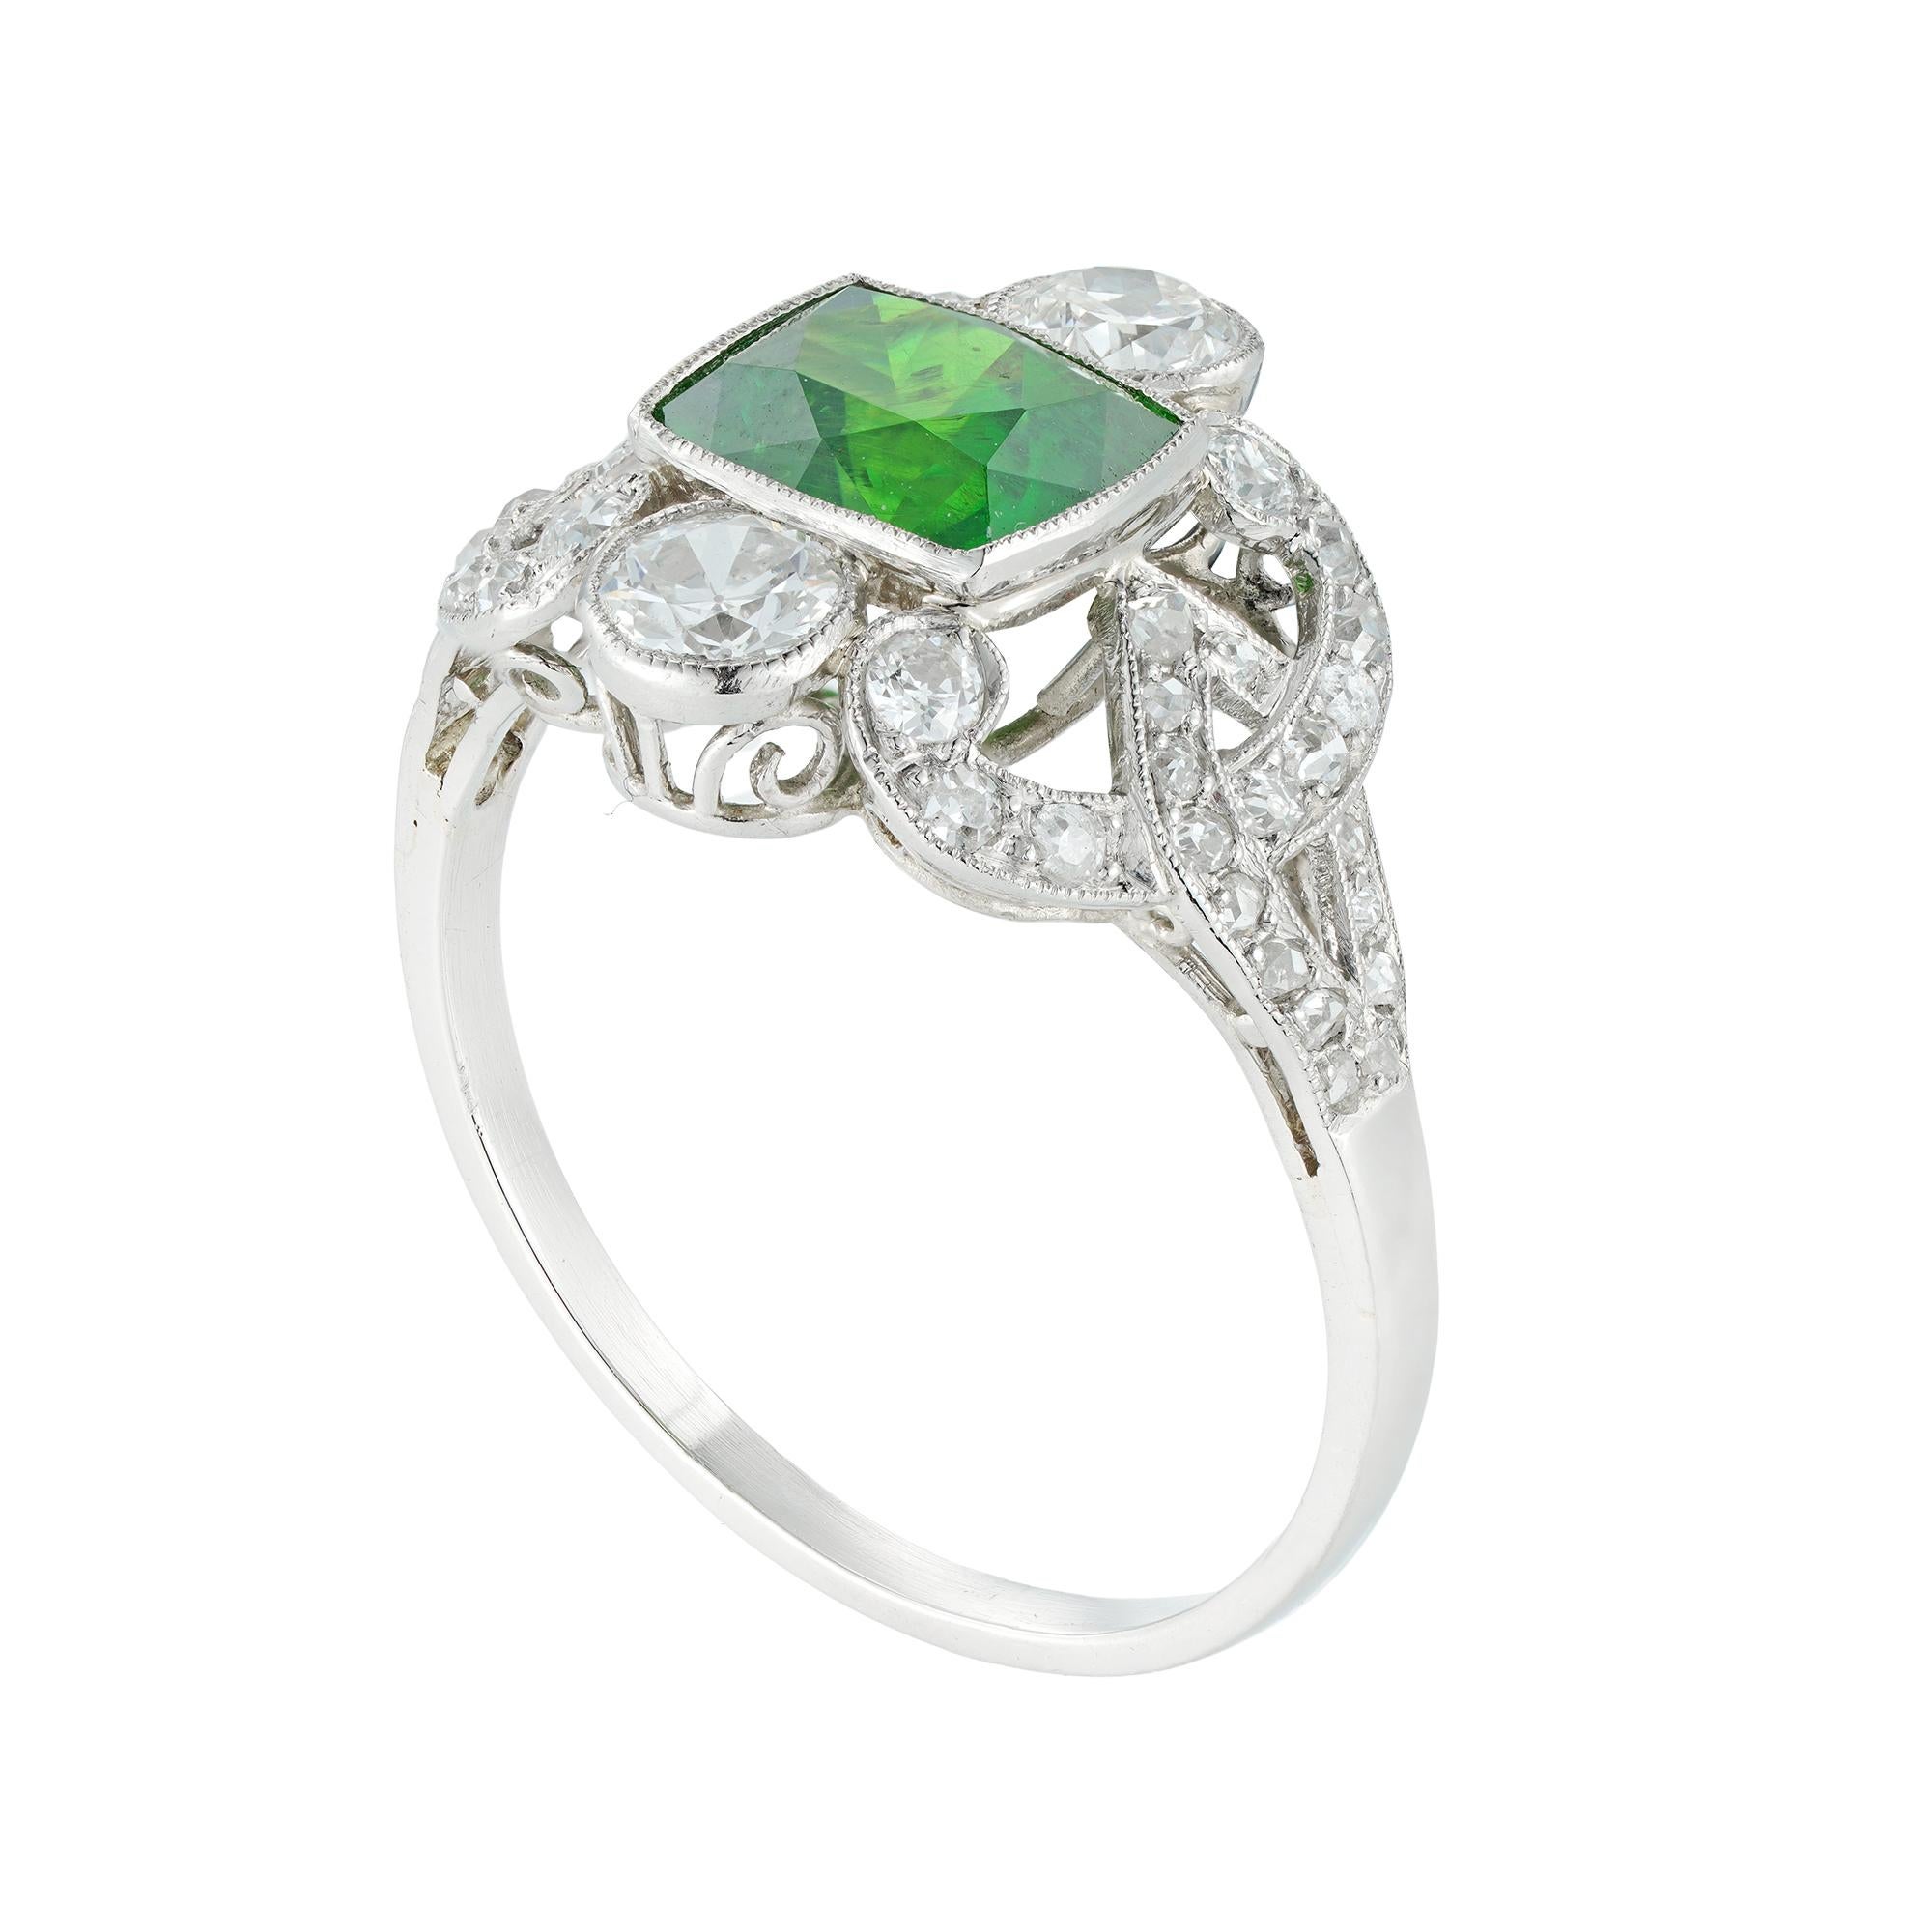 An Edwardian Demantoid garnet and diamond ring, the cushion-cut green garnet weighing 2.05 carats, accompanied by GCS report 81281-75 stating to be natural Demantoid garnet, with horsetail inclusions, vertically-set between two old European-cut